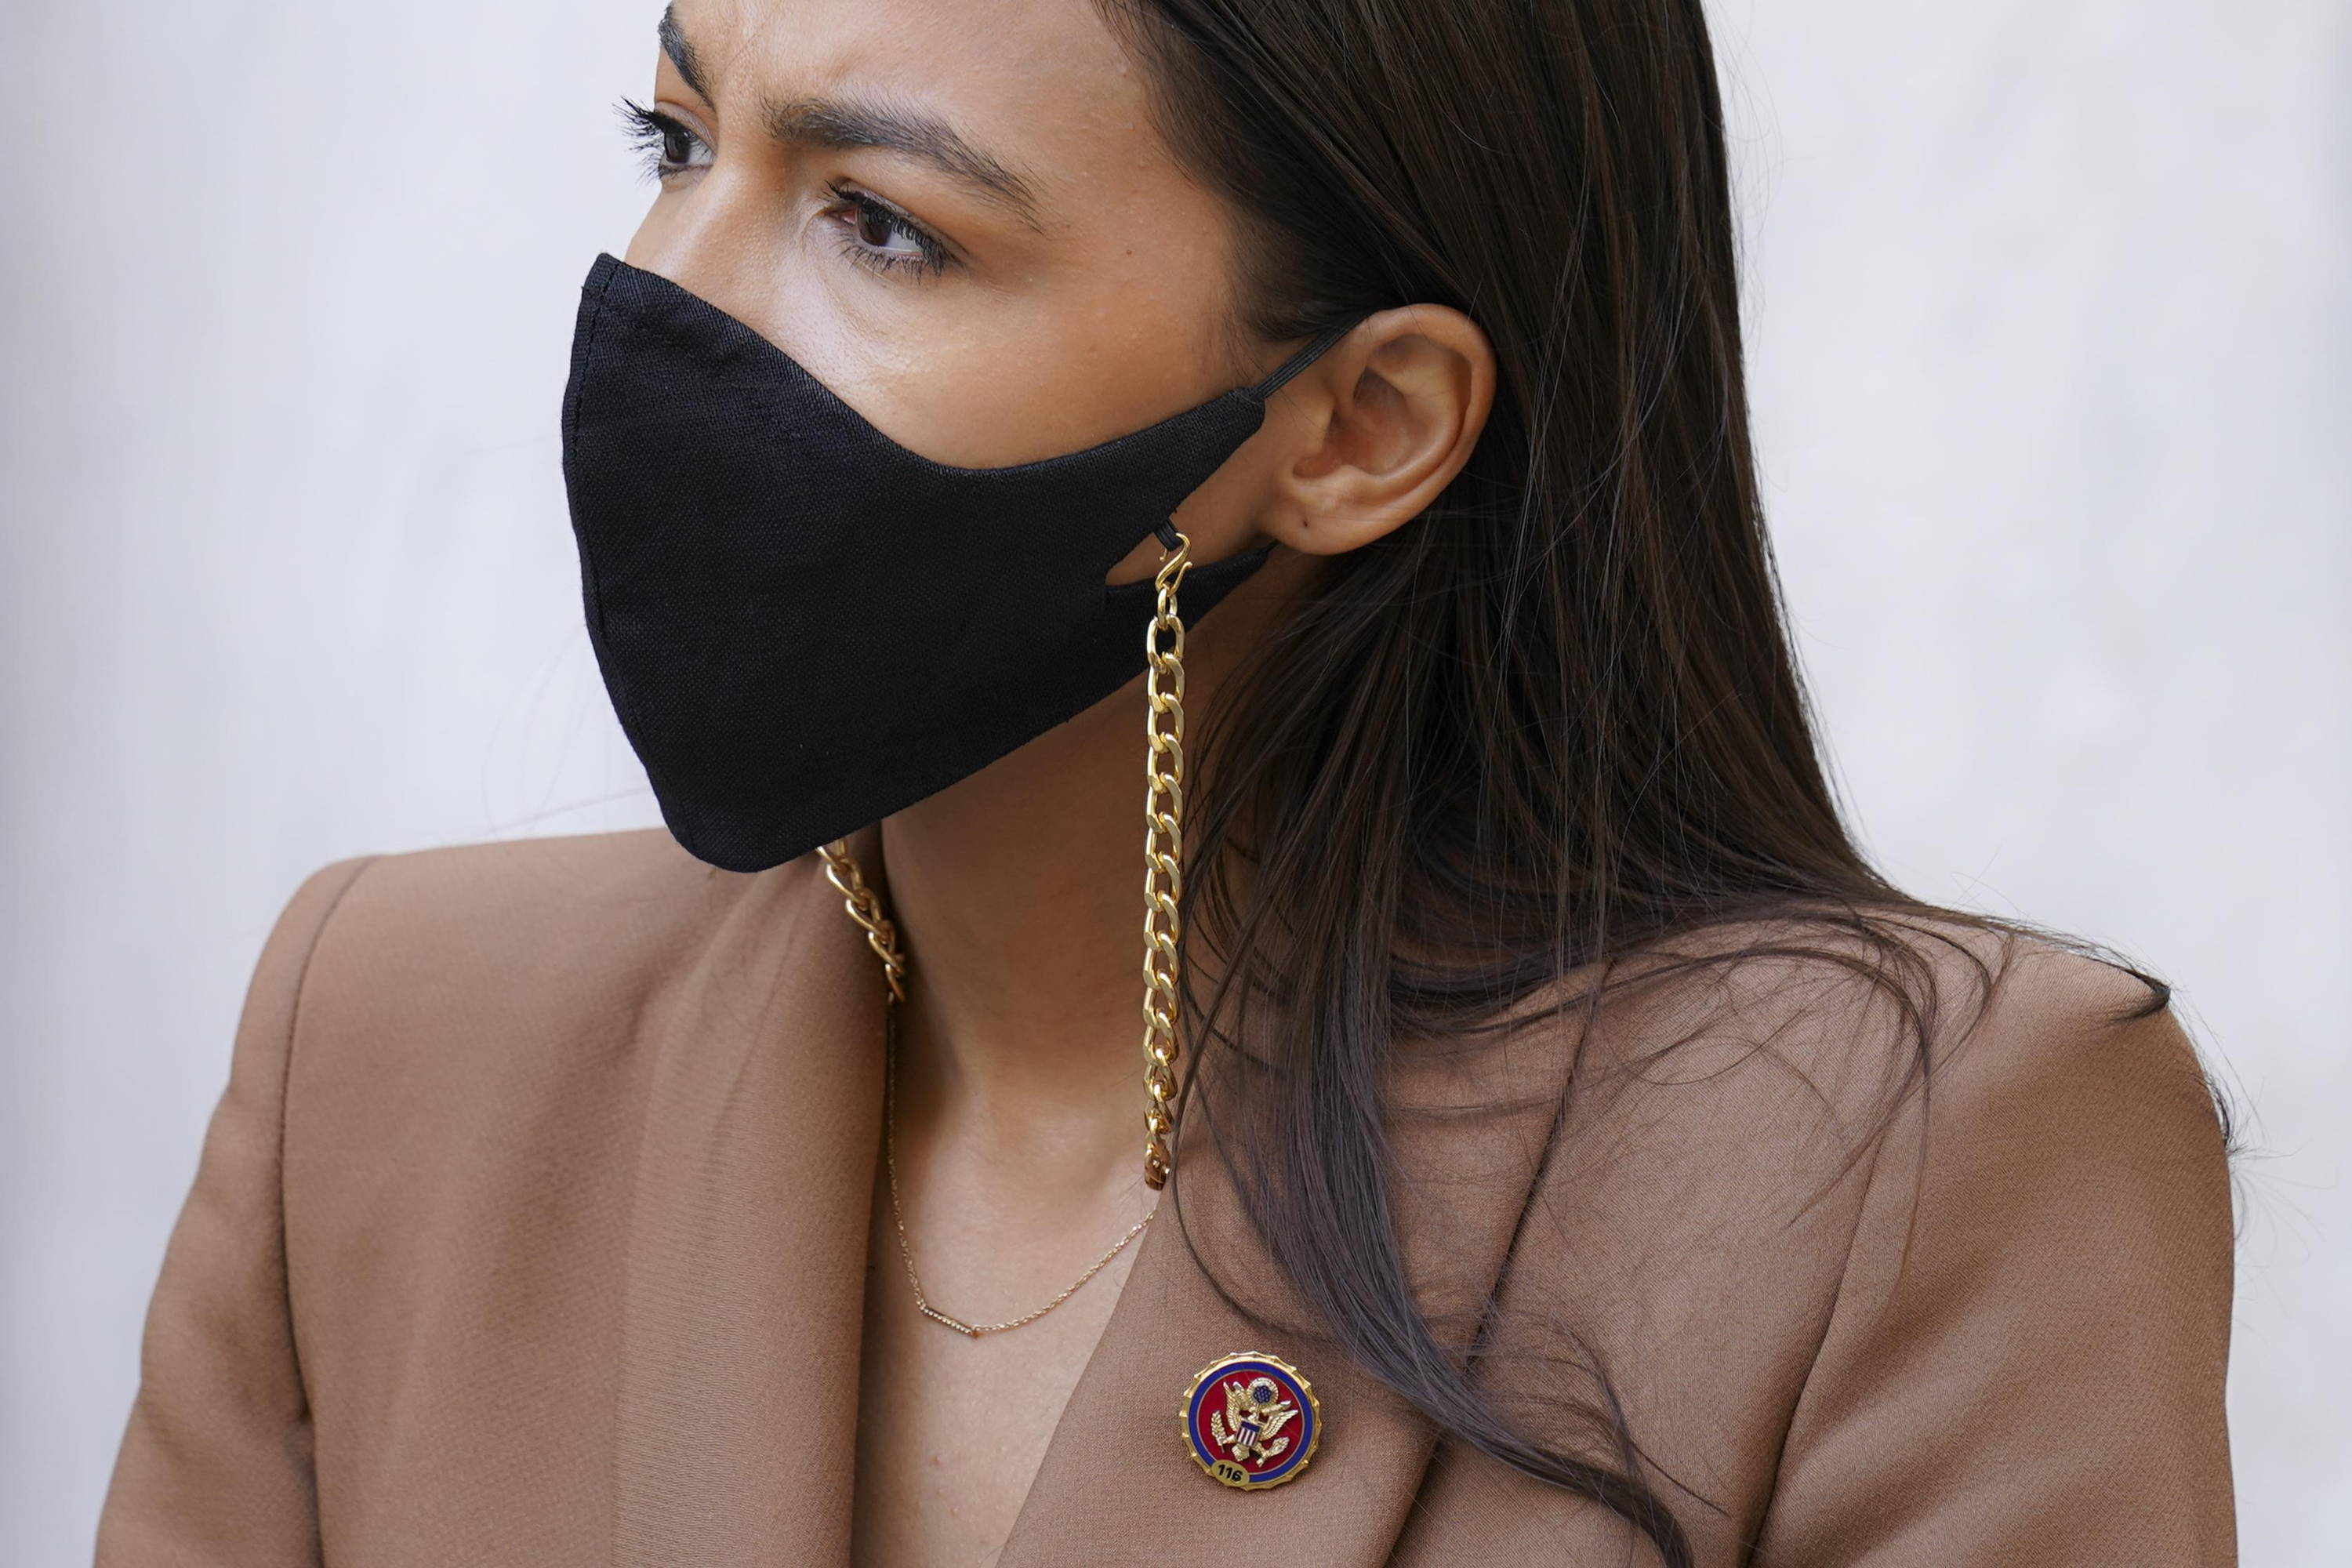 Alexandra Ocasio-Cortez wearing. aface mask with a metal chain